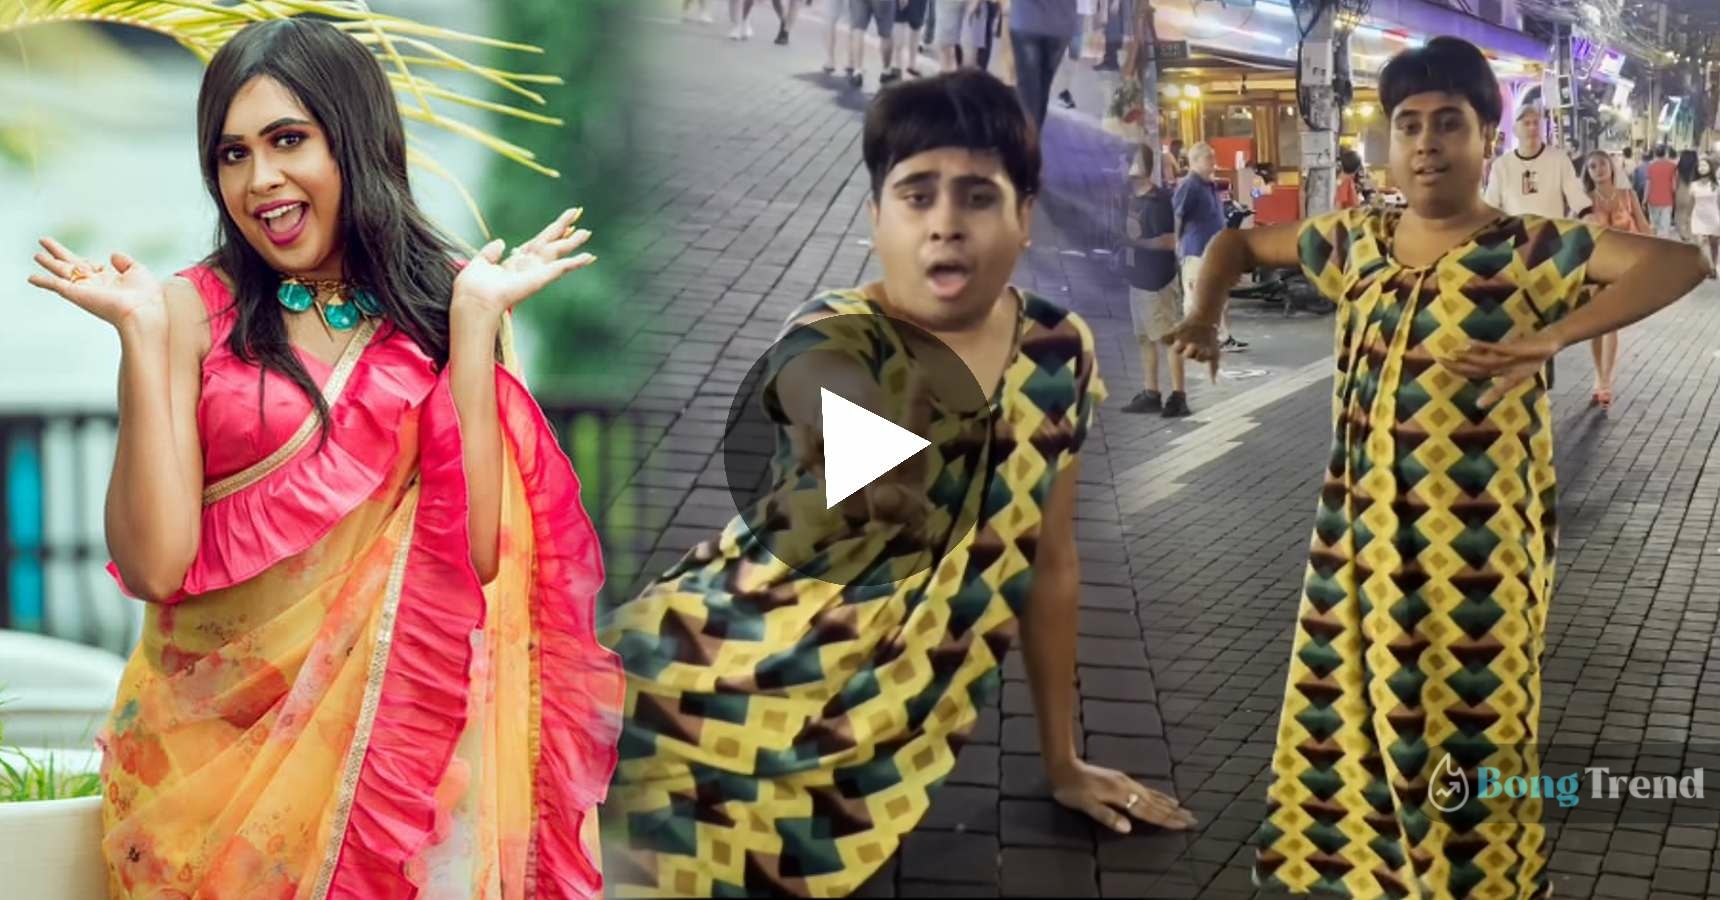 Sandy Saha lied while dancing on Pataya street viral video netizens gives mix reactions